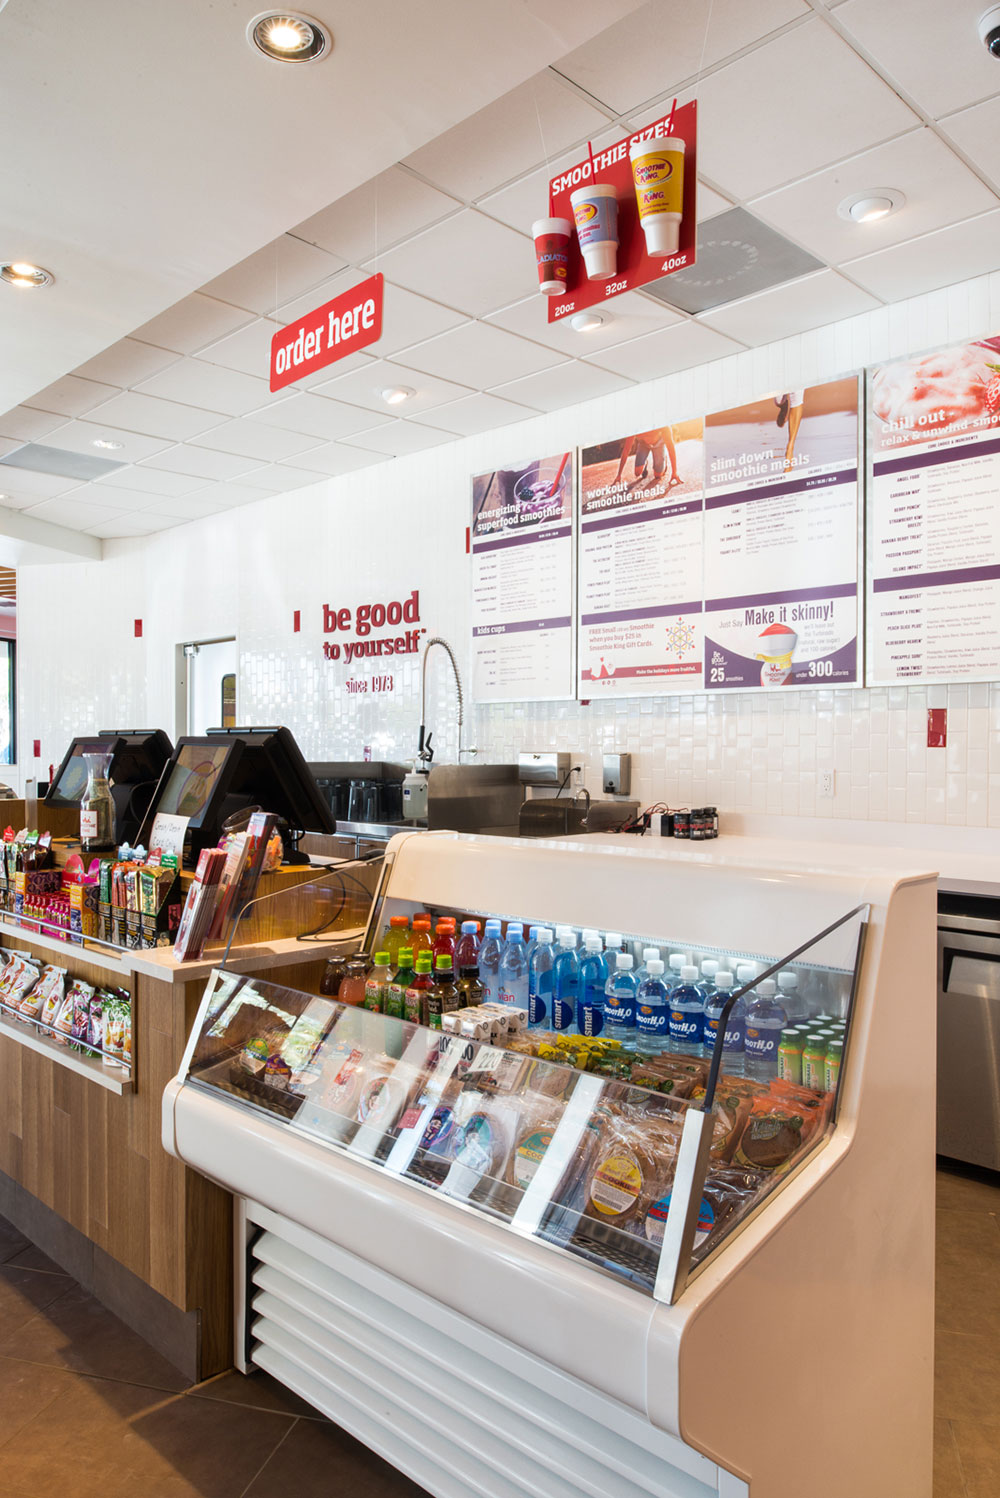 Smoothie King Franchise Opportunity